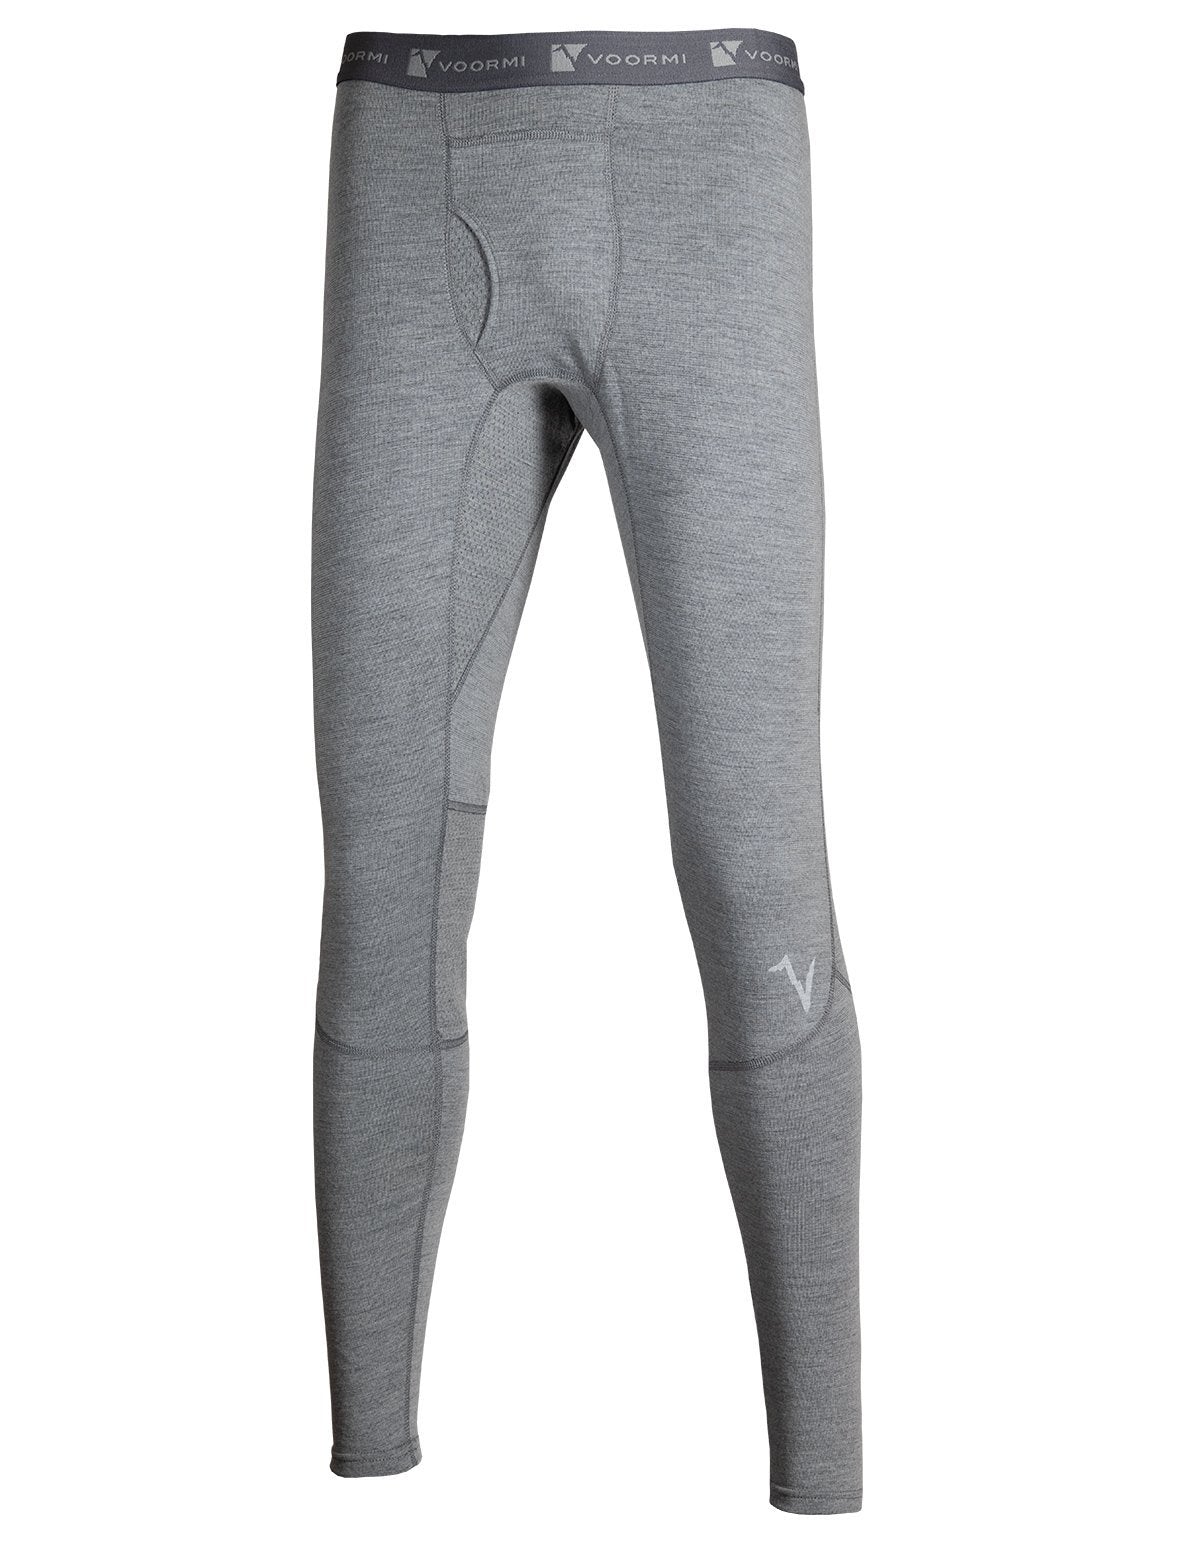 MEN'S BASELAYER BOTTOMS, FULL LENGTH by VOORMI